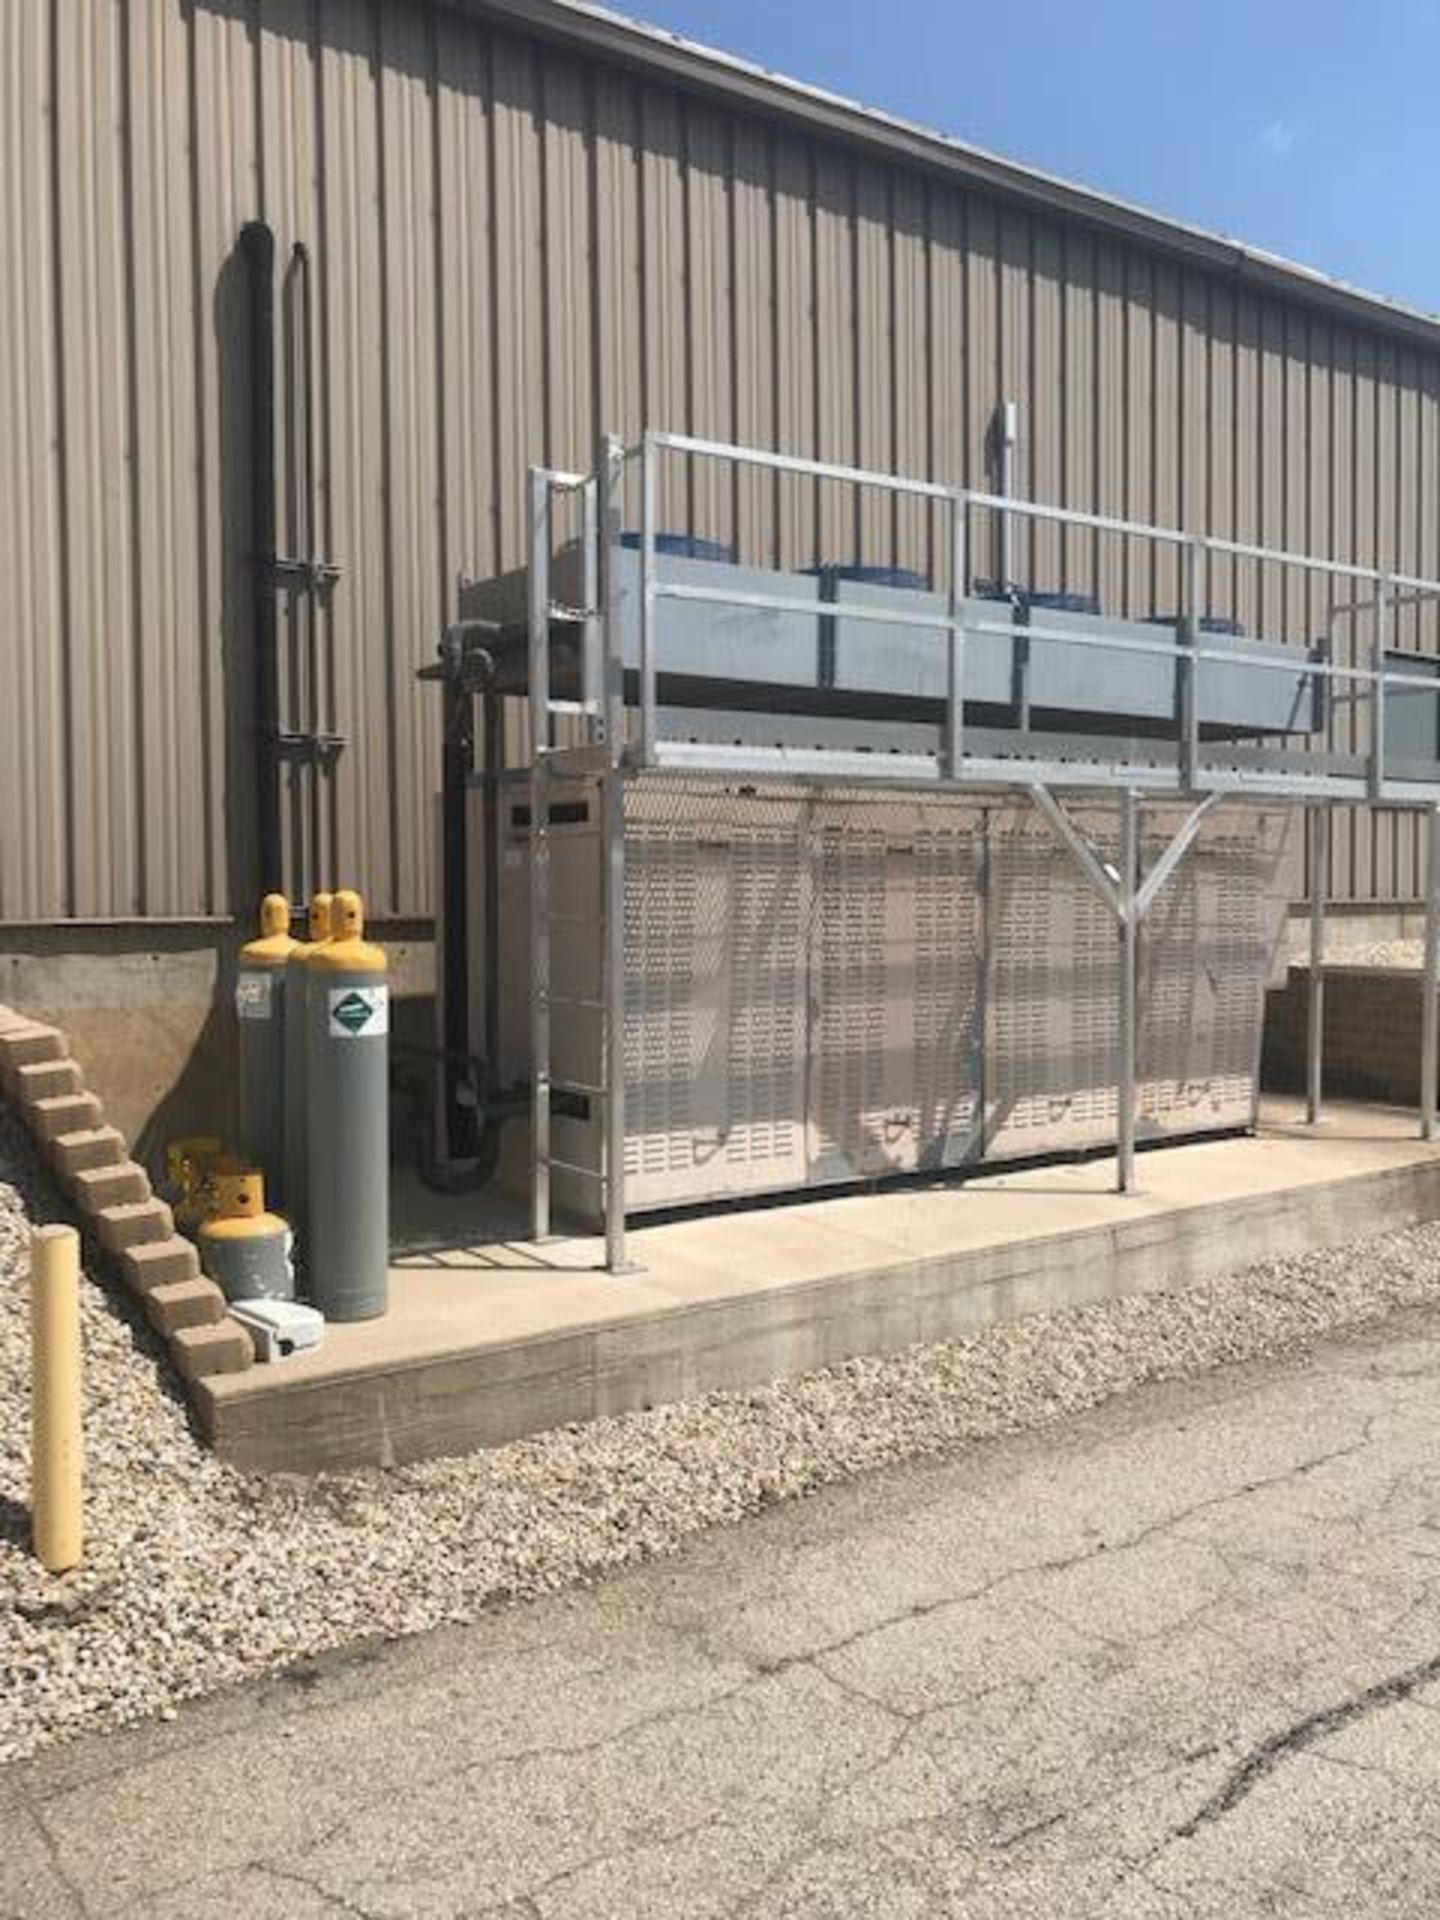 Cold zone self contained freon compressor {Located in Abrams, WI} - Image 7 of 8